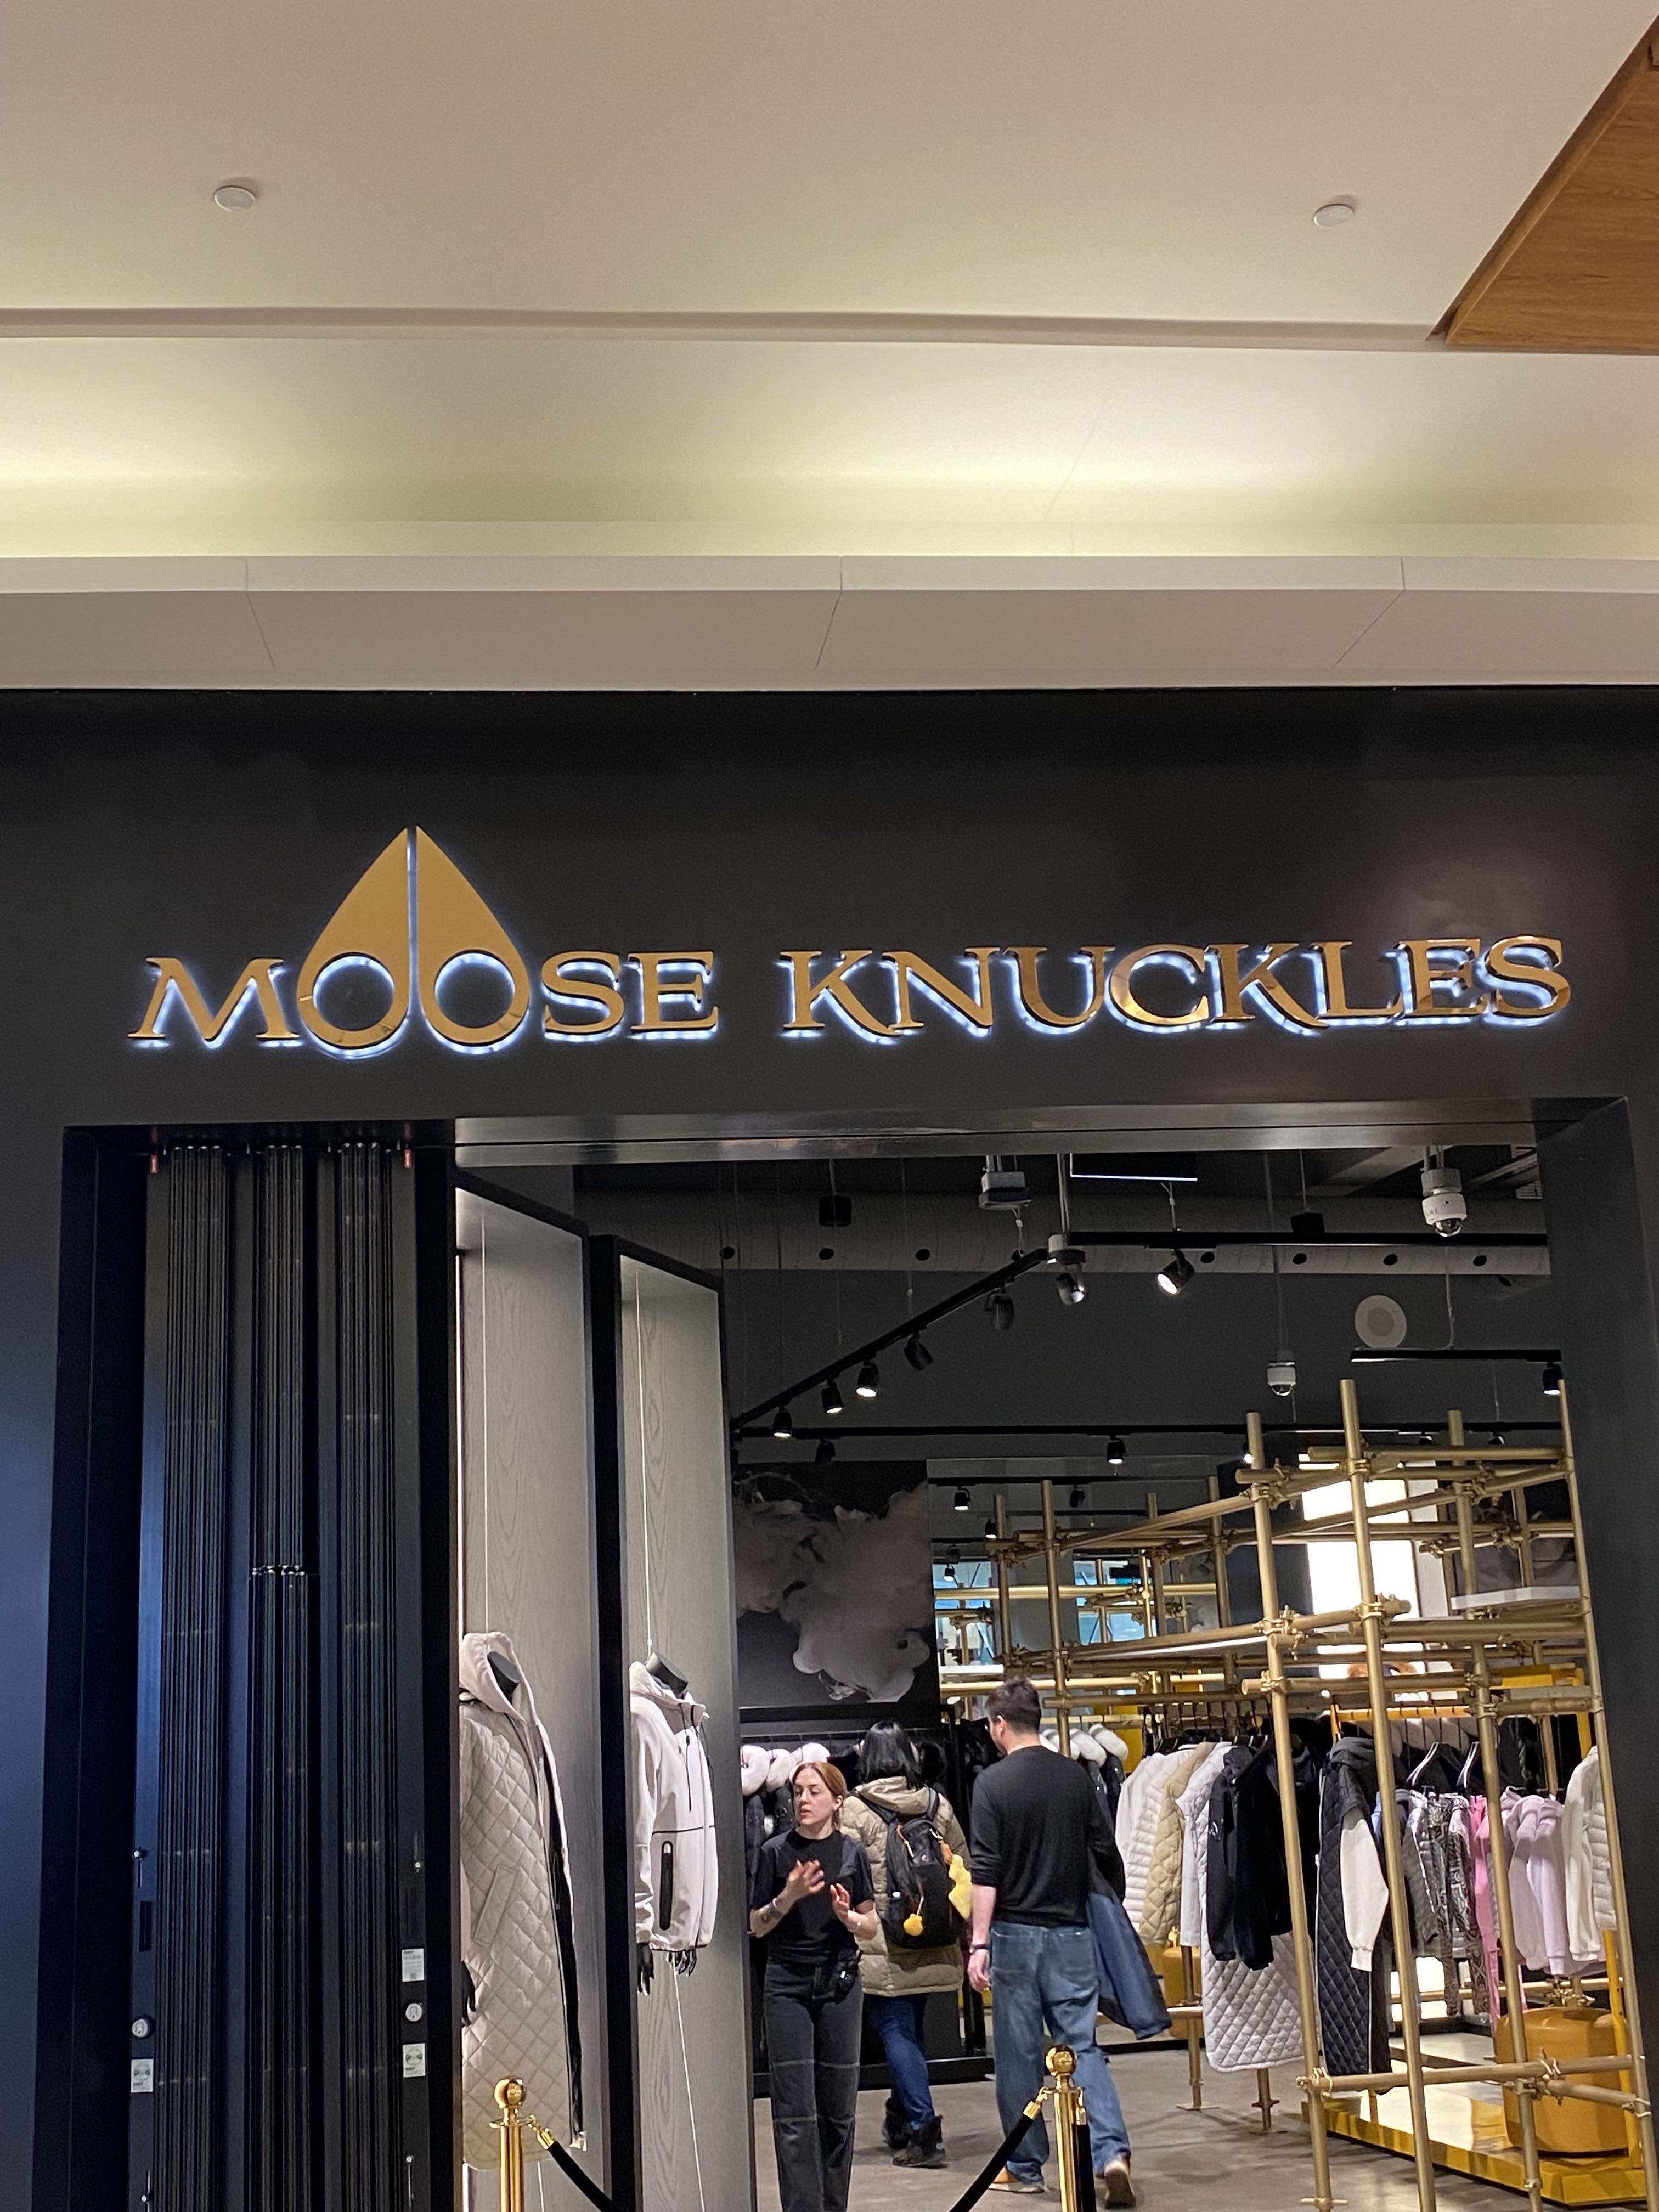 I can’t believe this is a real store…